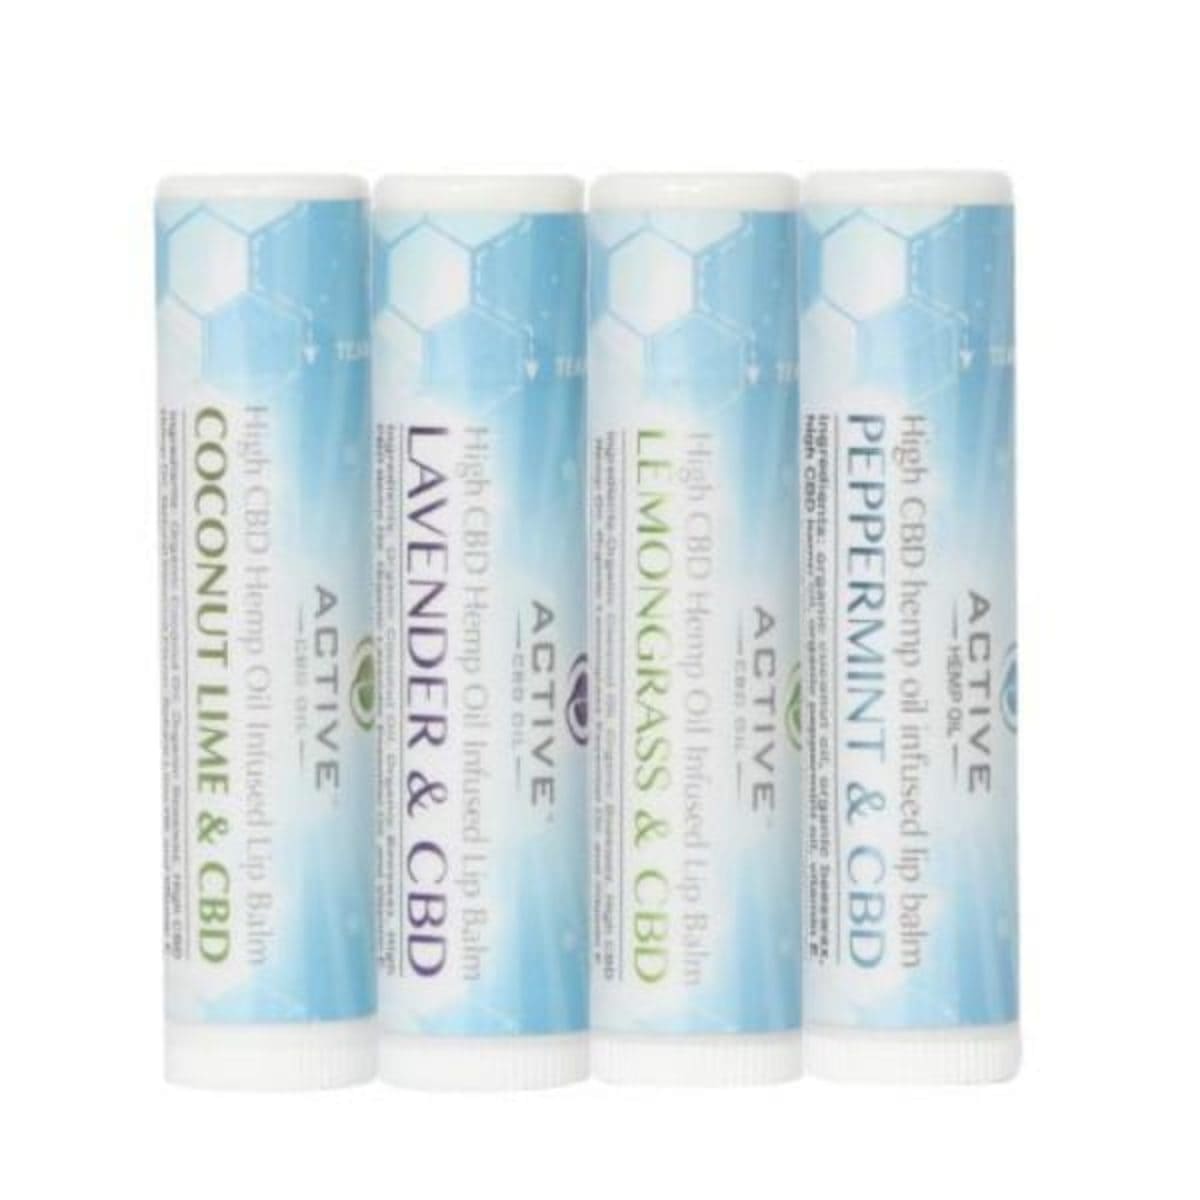 Active CBD CBD Oil Infused Lip Balm - Choose From Multiple Flavors image1